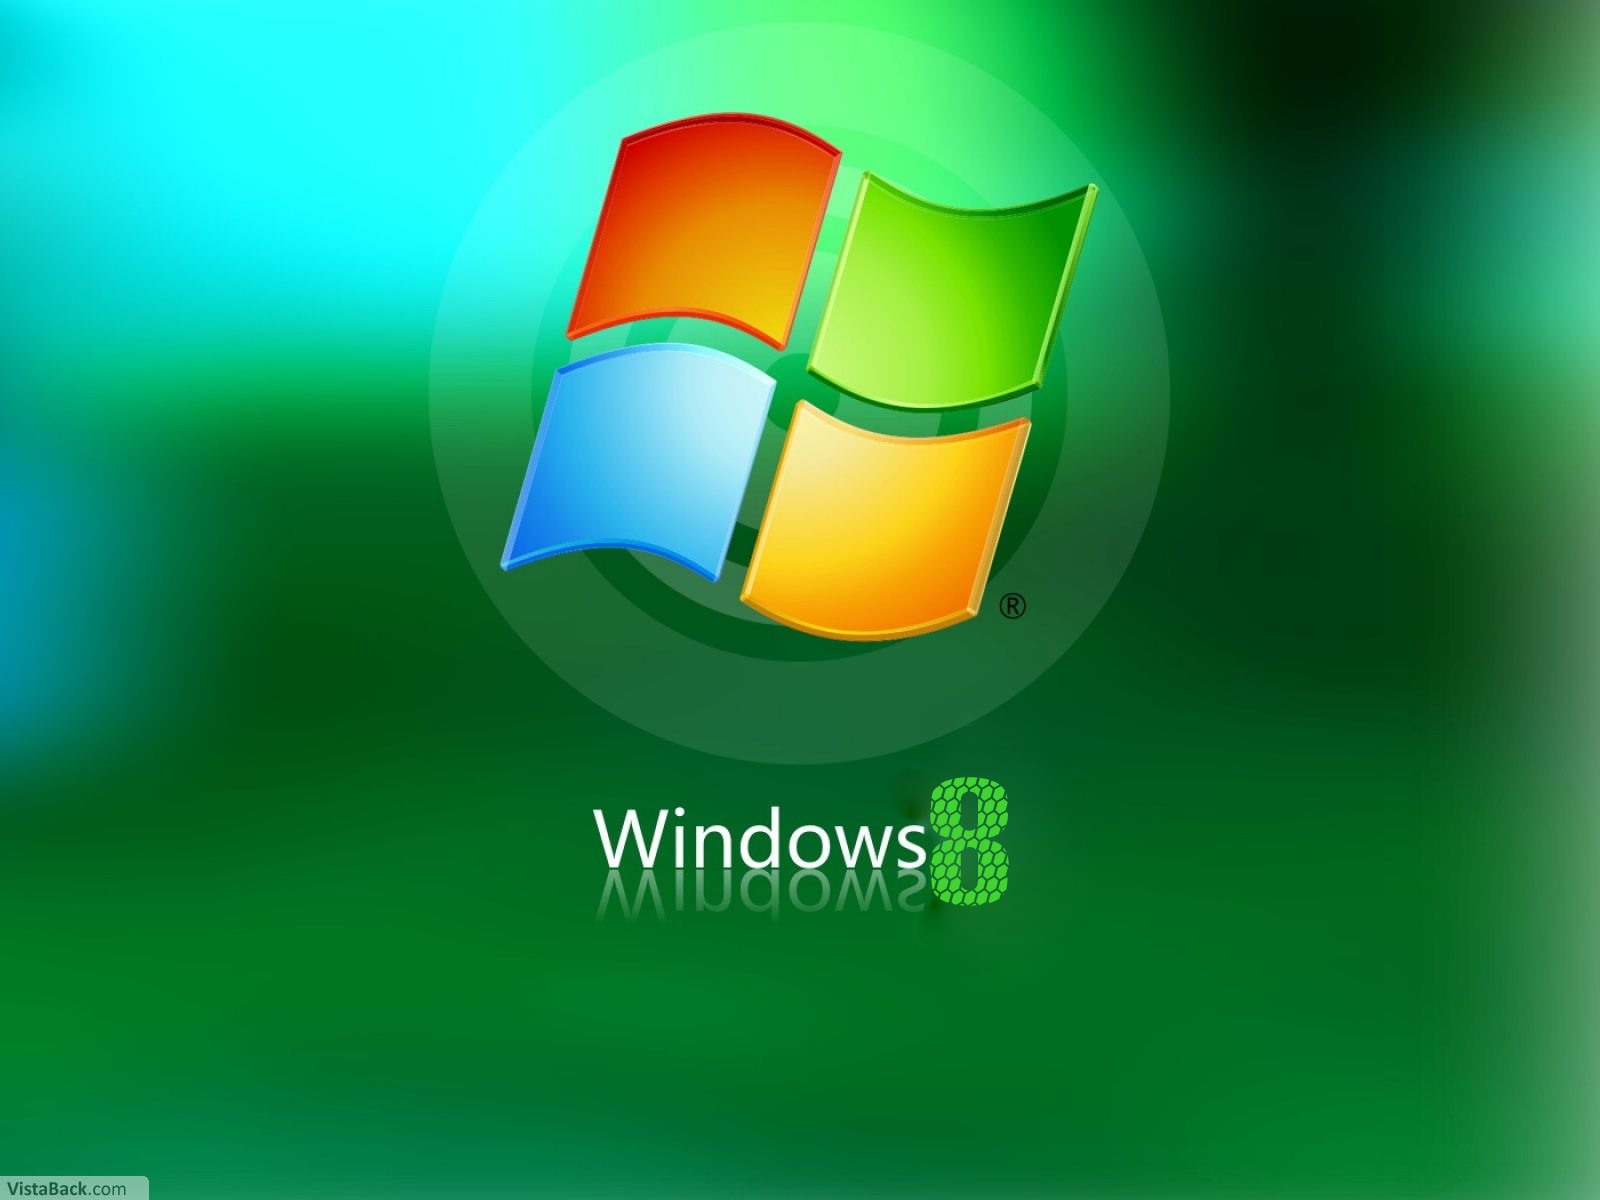 Free Wallpapers: Windows 8 Wallpapers